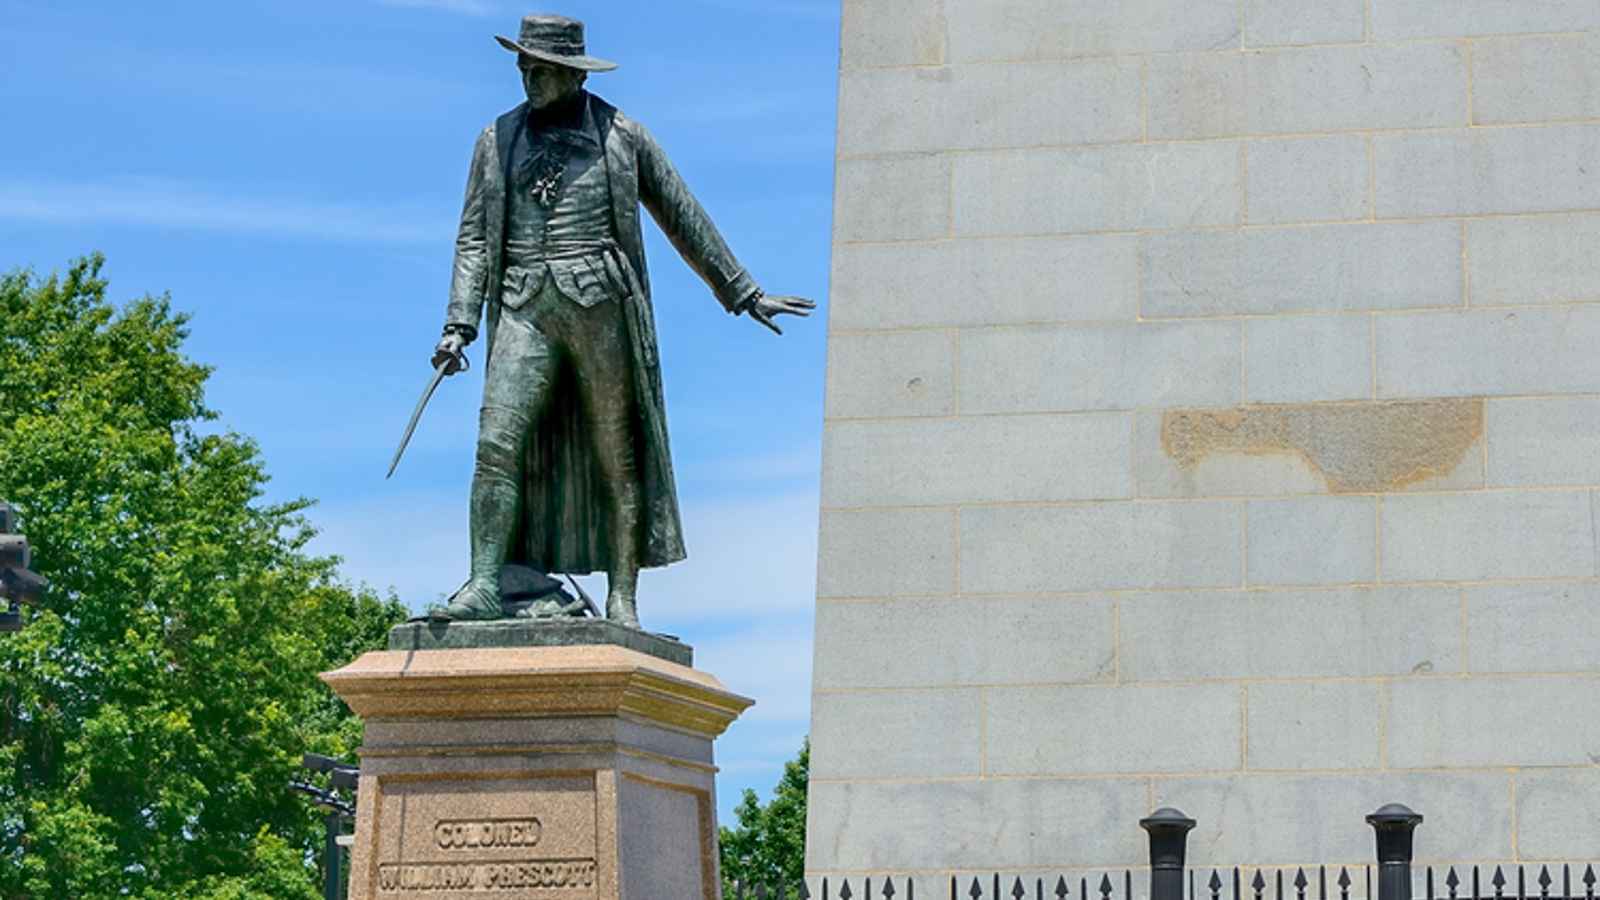 Bunker Hill Day 2023: Date, History, Facts about The Battle of Bunker Hill